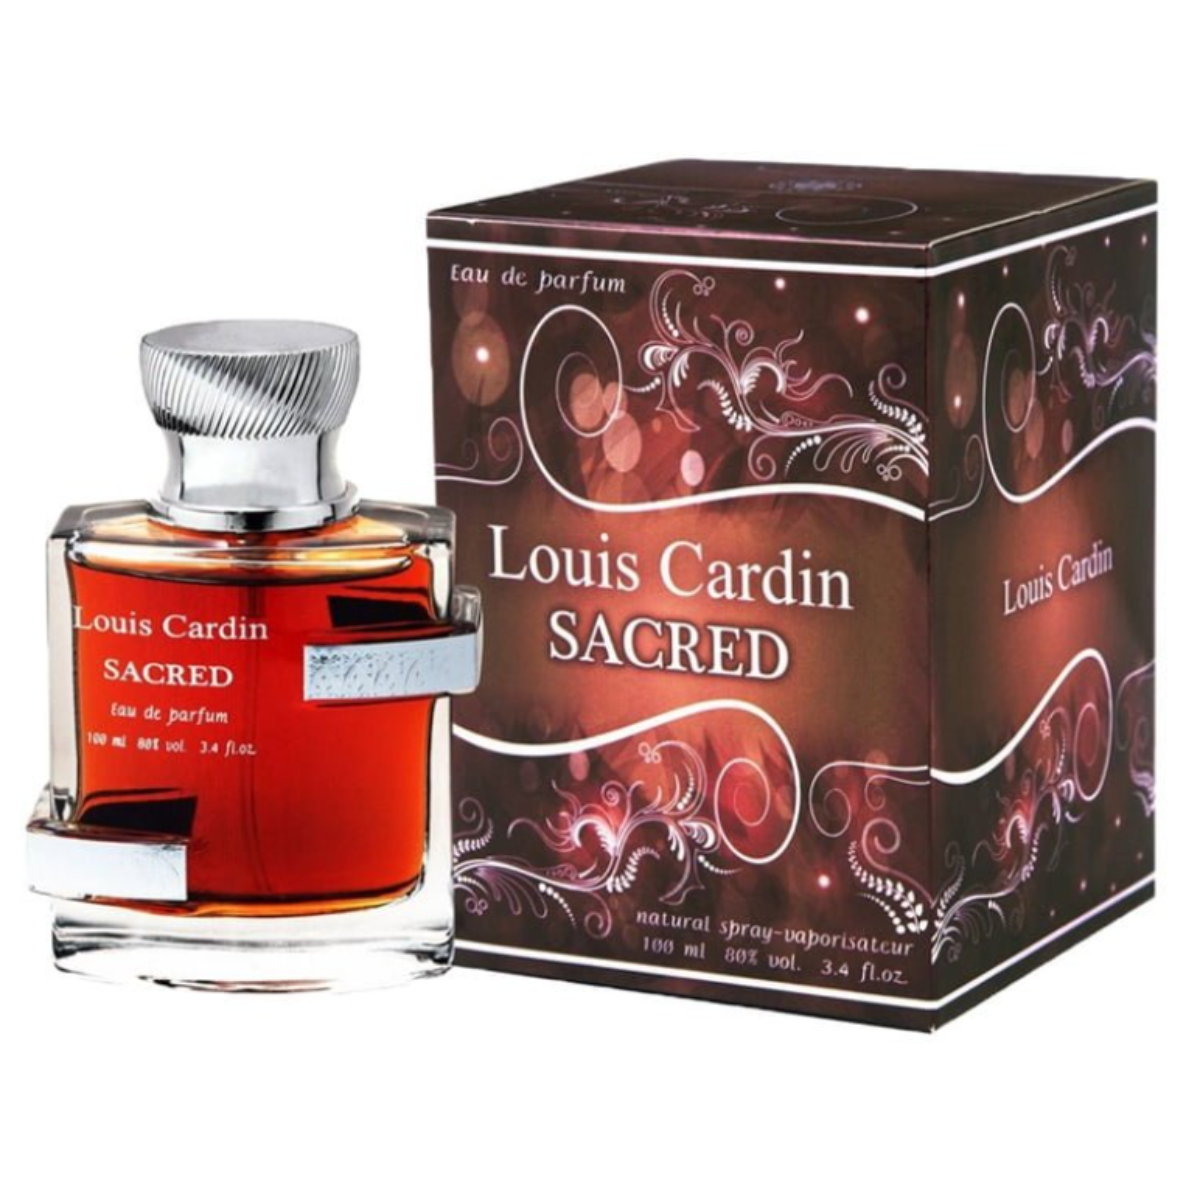 Louis Cardin SACRED with comparison to 24 Gold by Scentstory